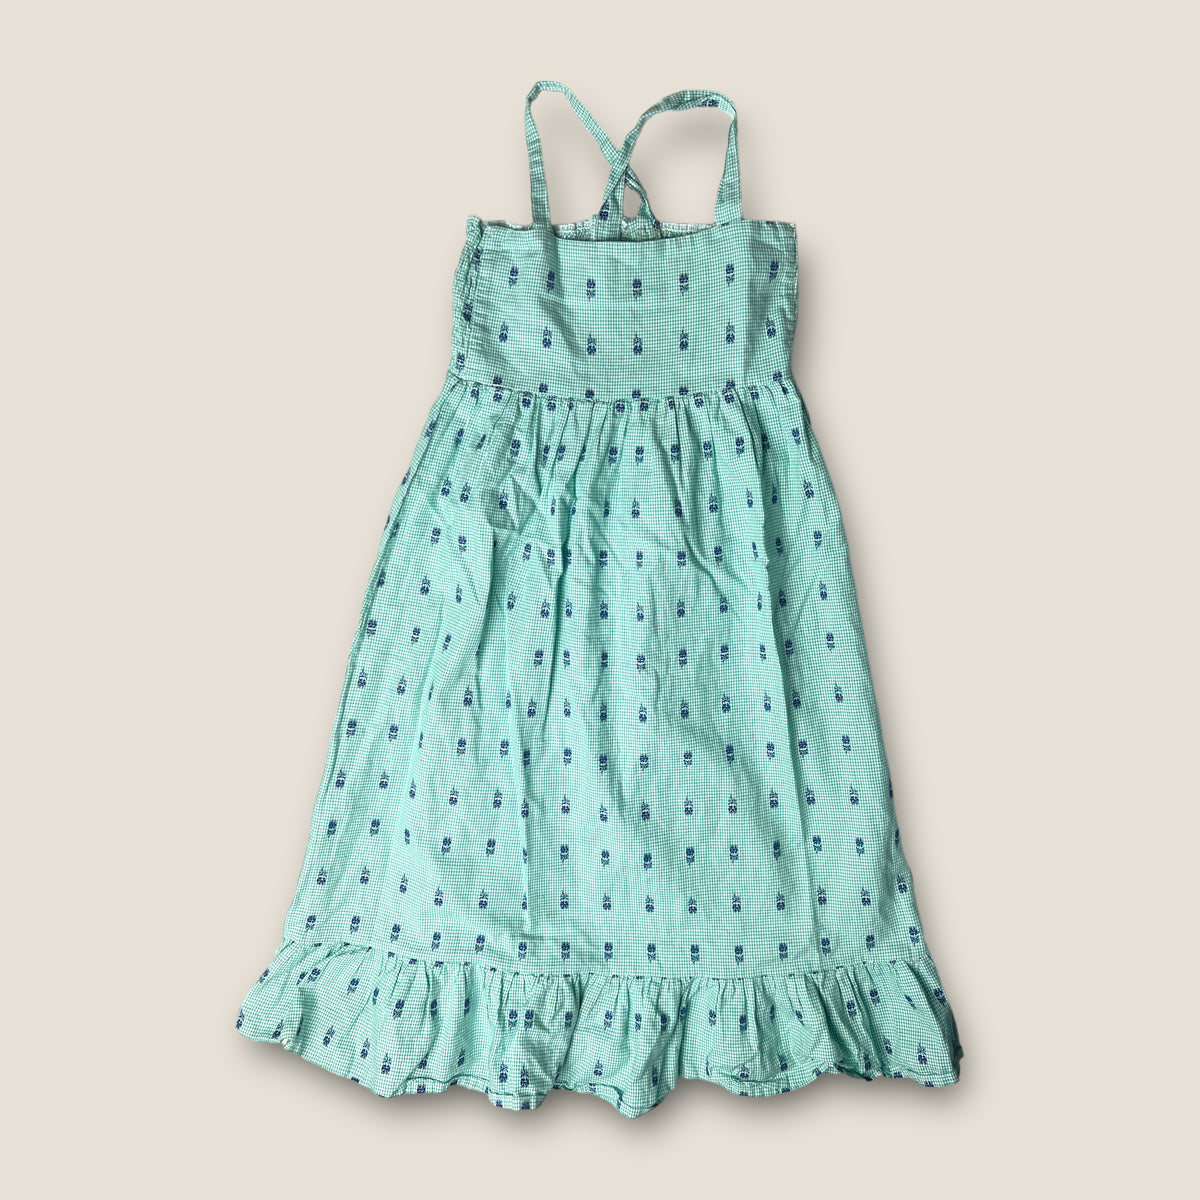 The Campamento Dress size 5-6 years